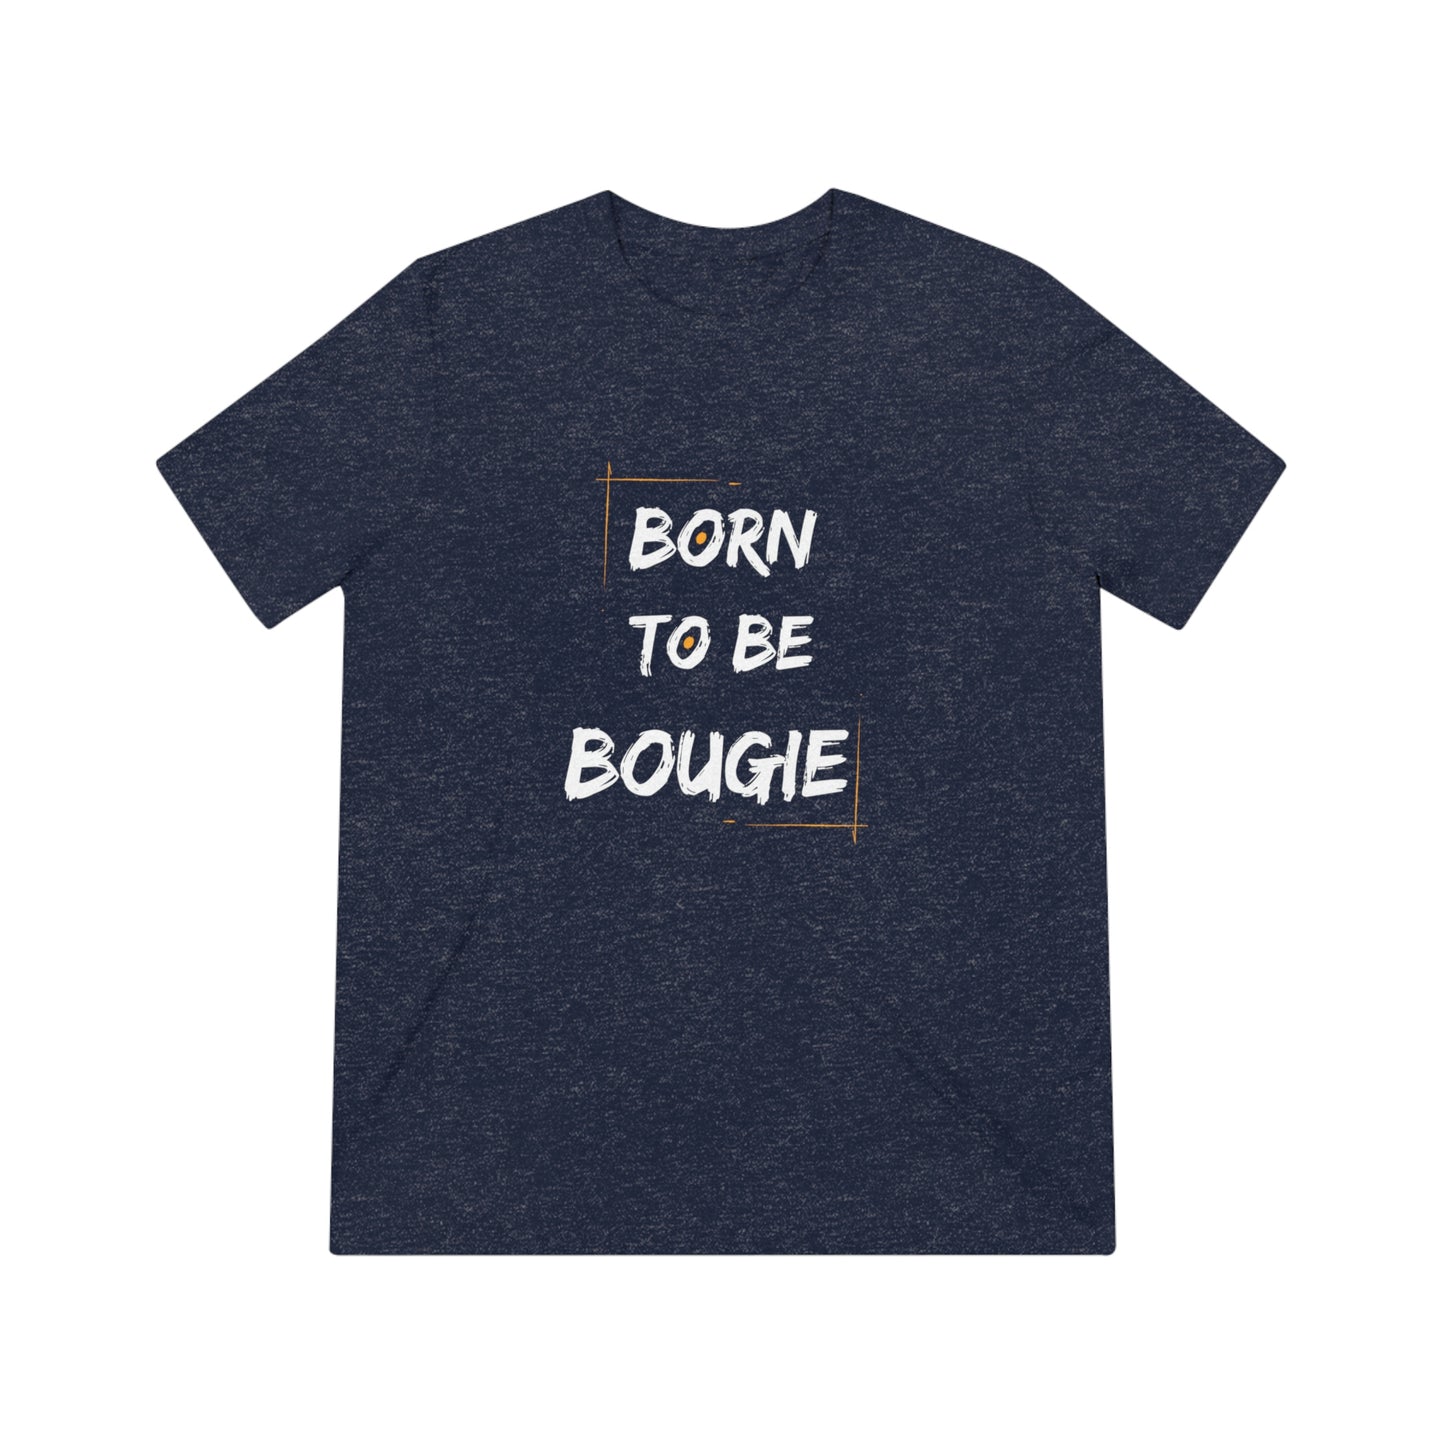 Born To Be Bougie Triblend Tee